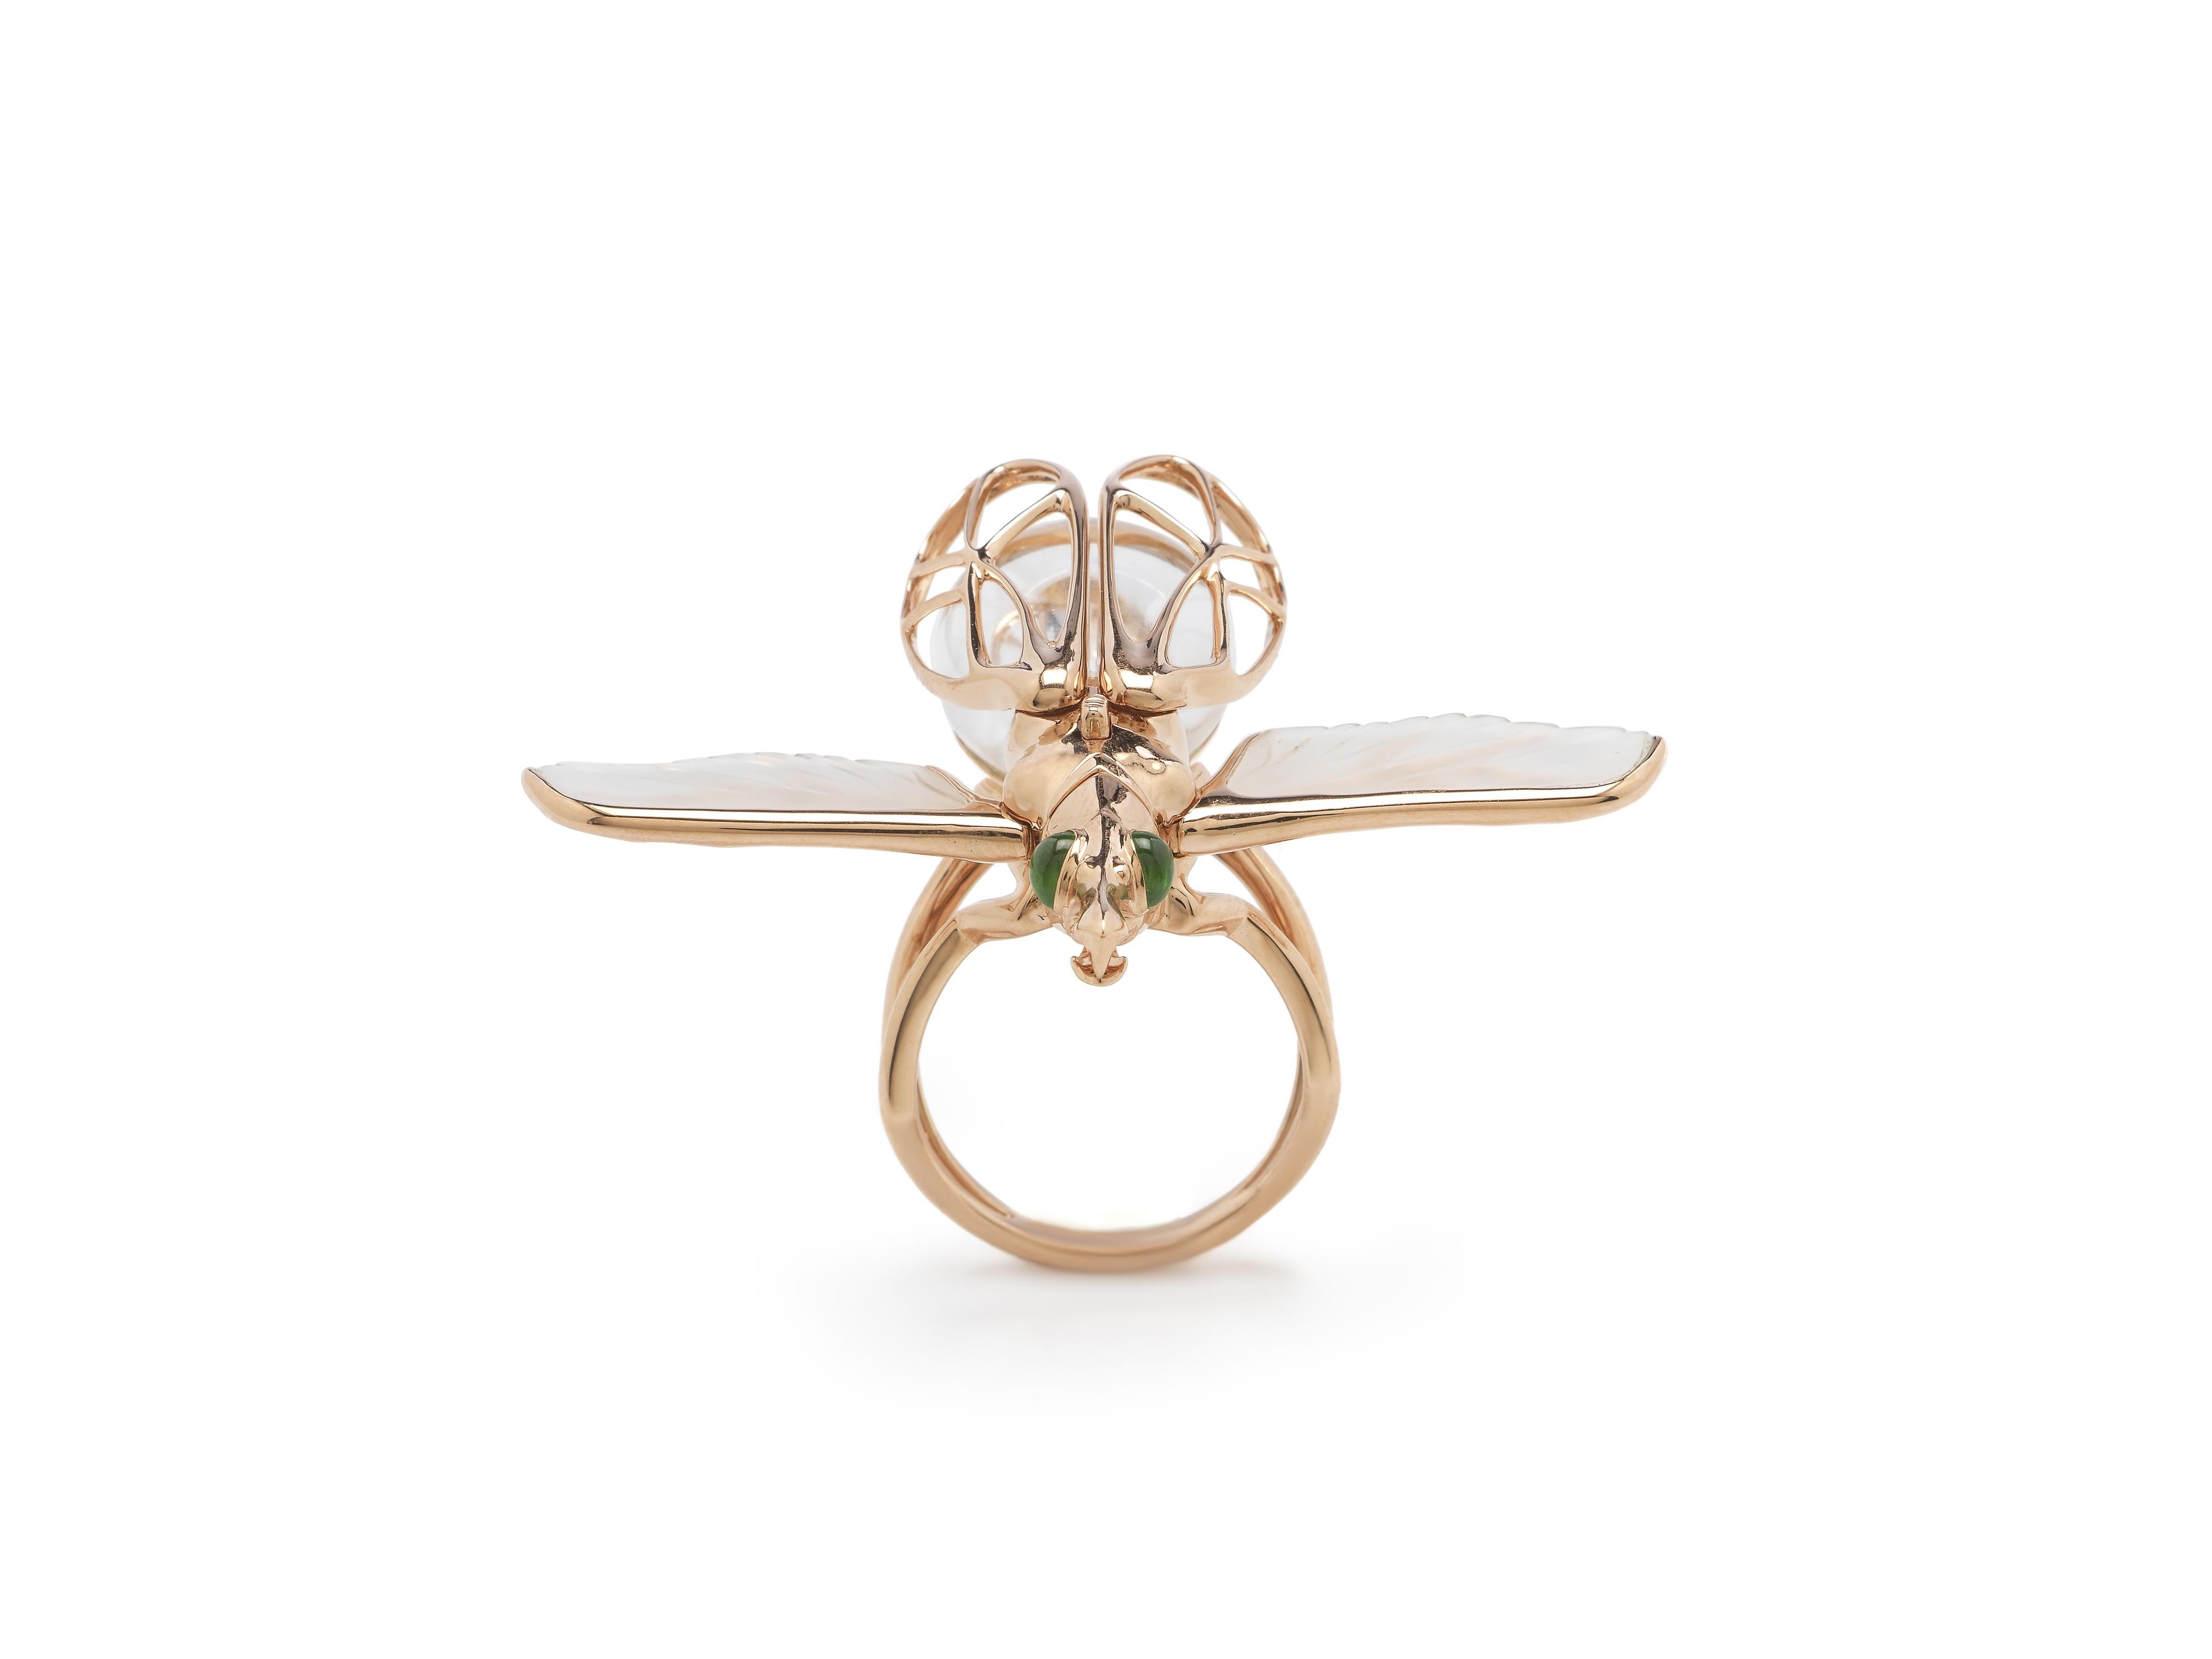 This stunning cocktail ring’s ingenious construction makes it a true conversation piece. Designed in 18k rose gold, the beetle-like insect’s upper wings, set with green tsavorites, can be opened or closed to reveal the insect’s rock crystal body